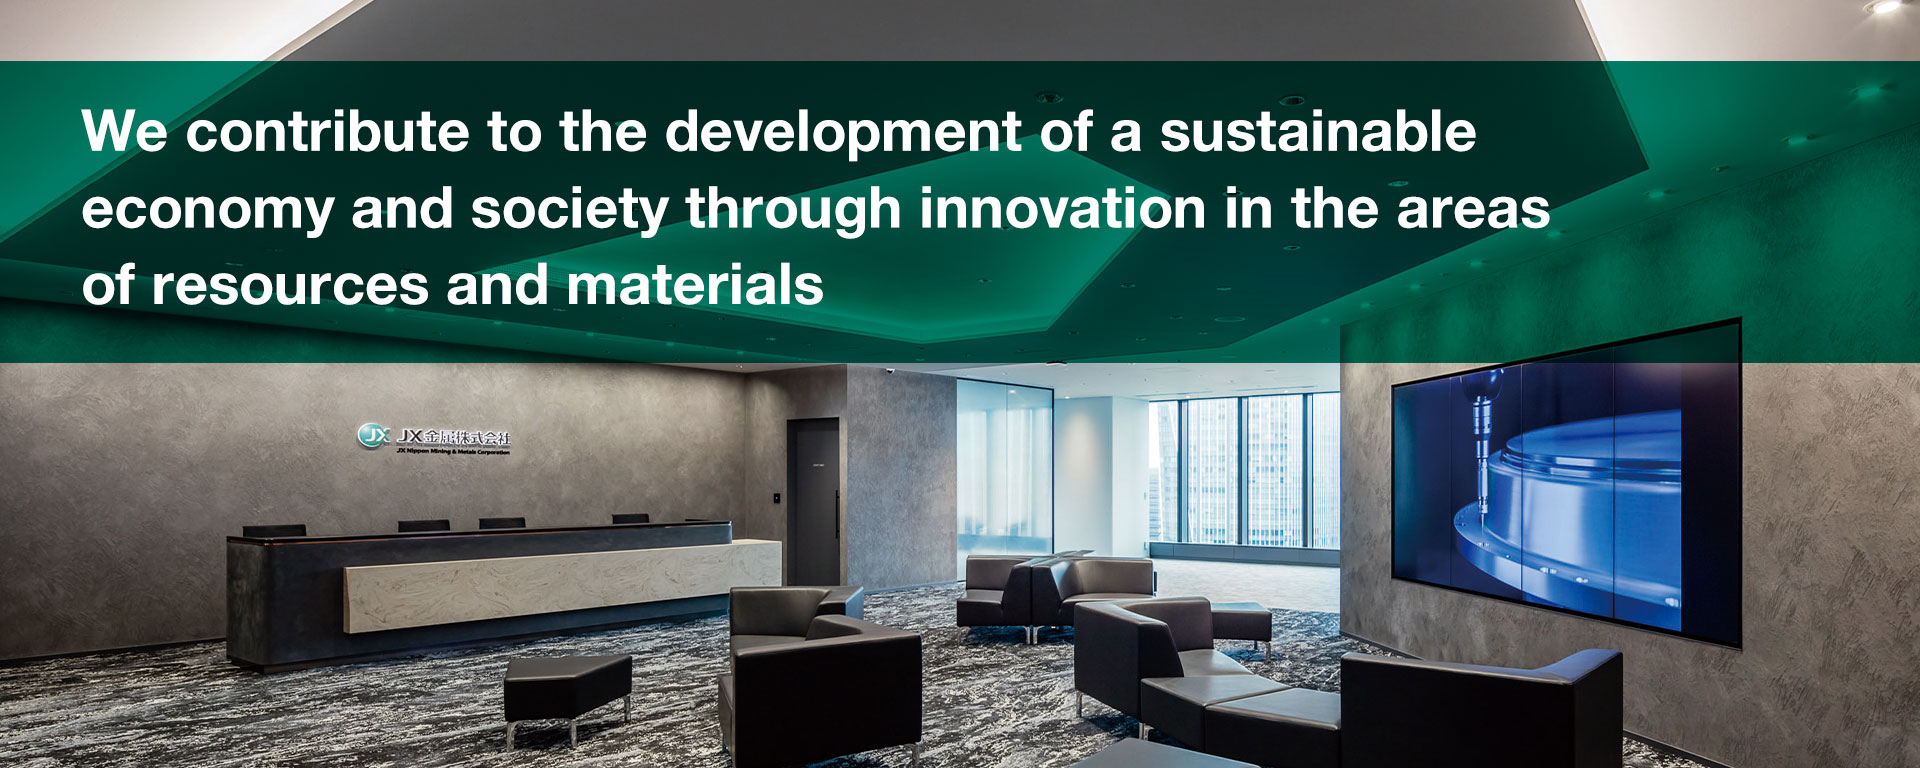 We contribute to the development of a sustainable economy and society through innovation in the areas of resources and materials.